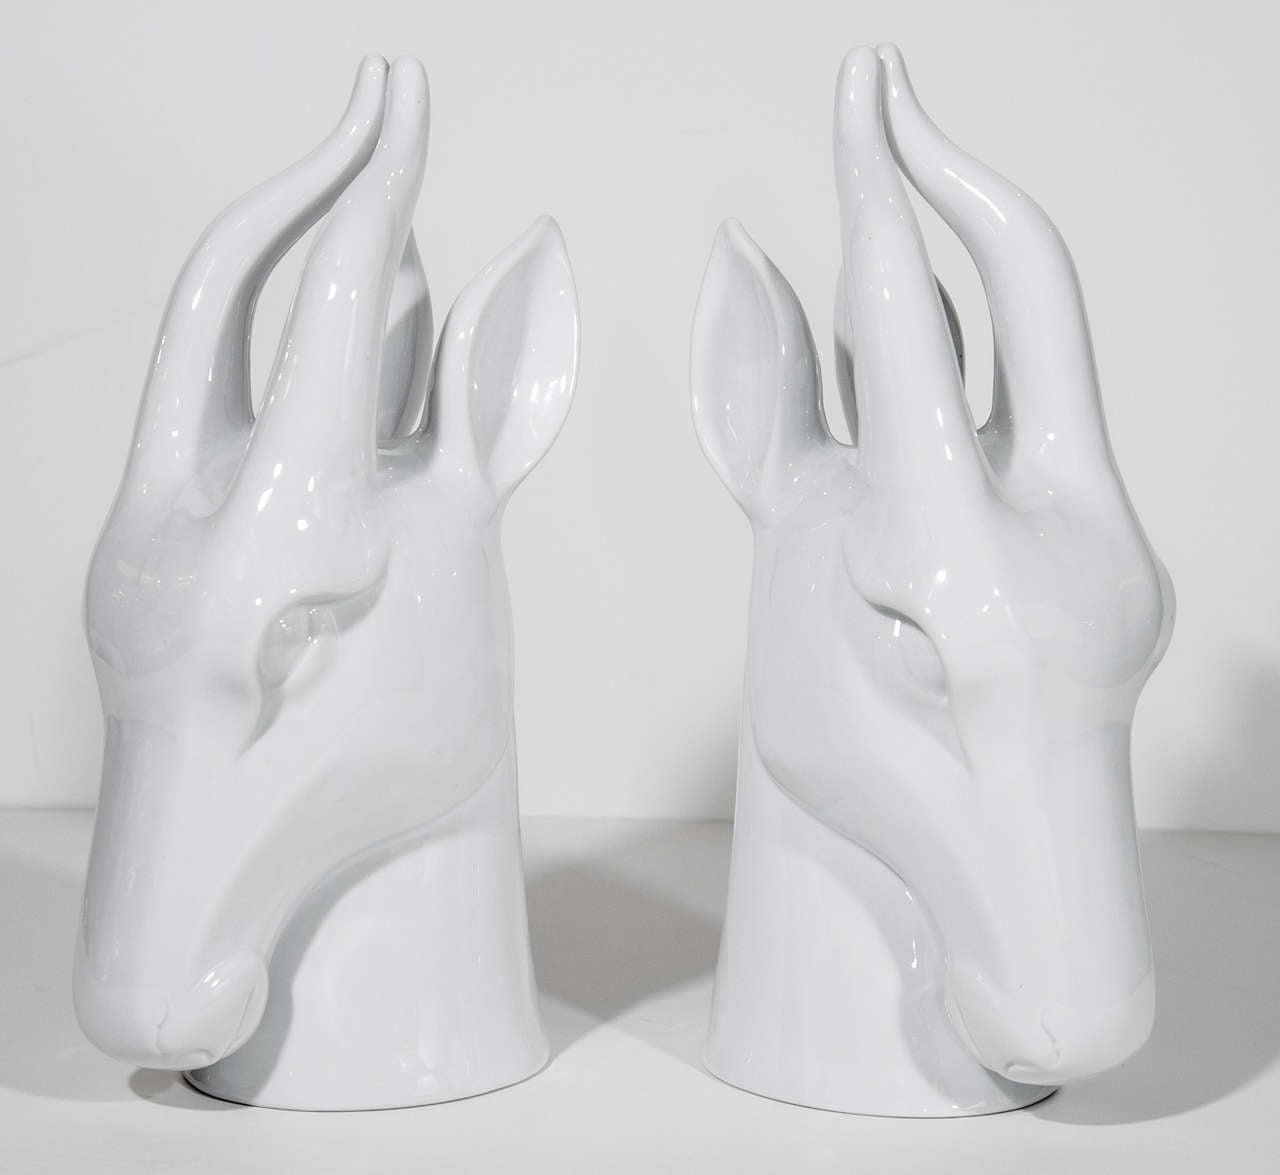 Pair of highly stylized ceramic gazelle or ibex sculptures in a white porcelain glaze finish (blanc de chine). The sculptures have a modernist form and and truly beautiful from all angles.  Make great desk or bookcase decorative objects.